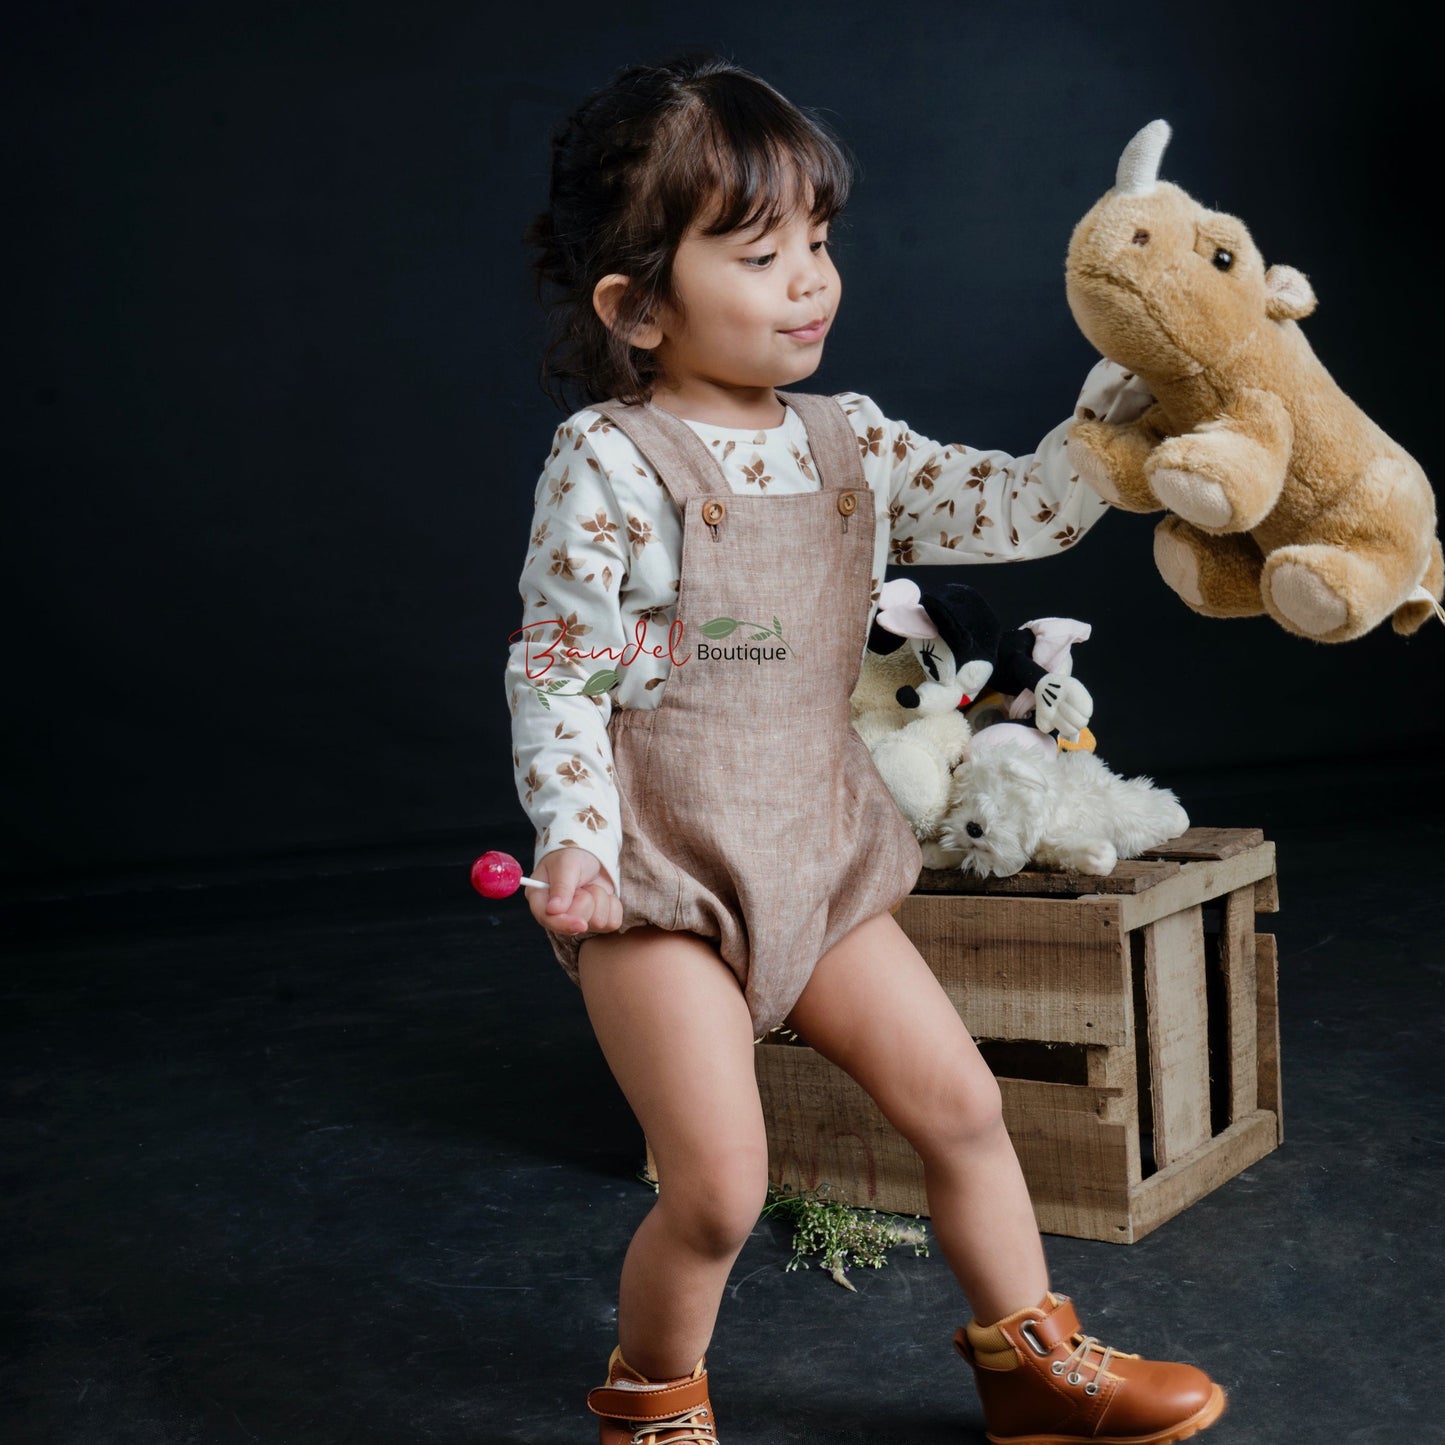 This soft linen romper is perfect for keeping your little one comfortable all day. It comes with two shoulder straps and a wooden button closure at the front, making it quick and easy to put on. Its breathable quality and natural fibers will keep your baby cool while looking stylish and cute.